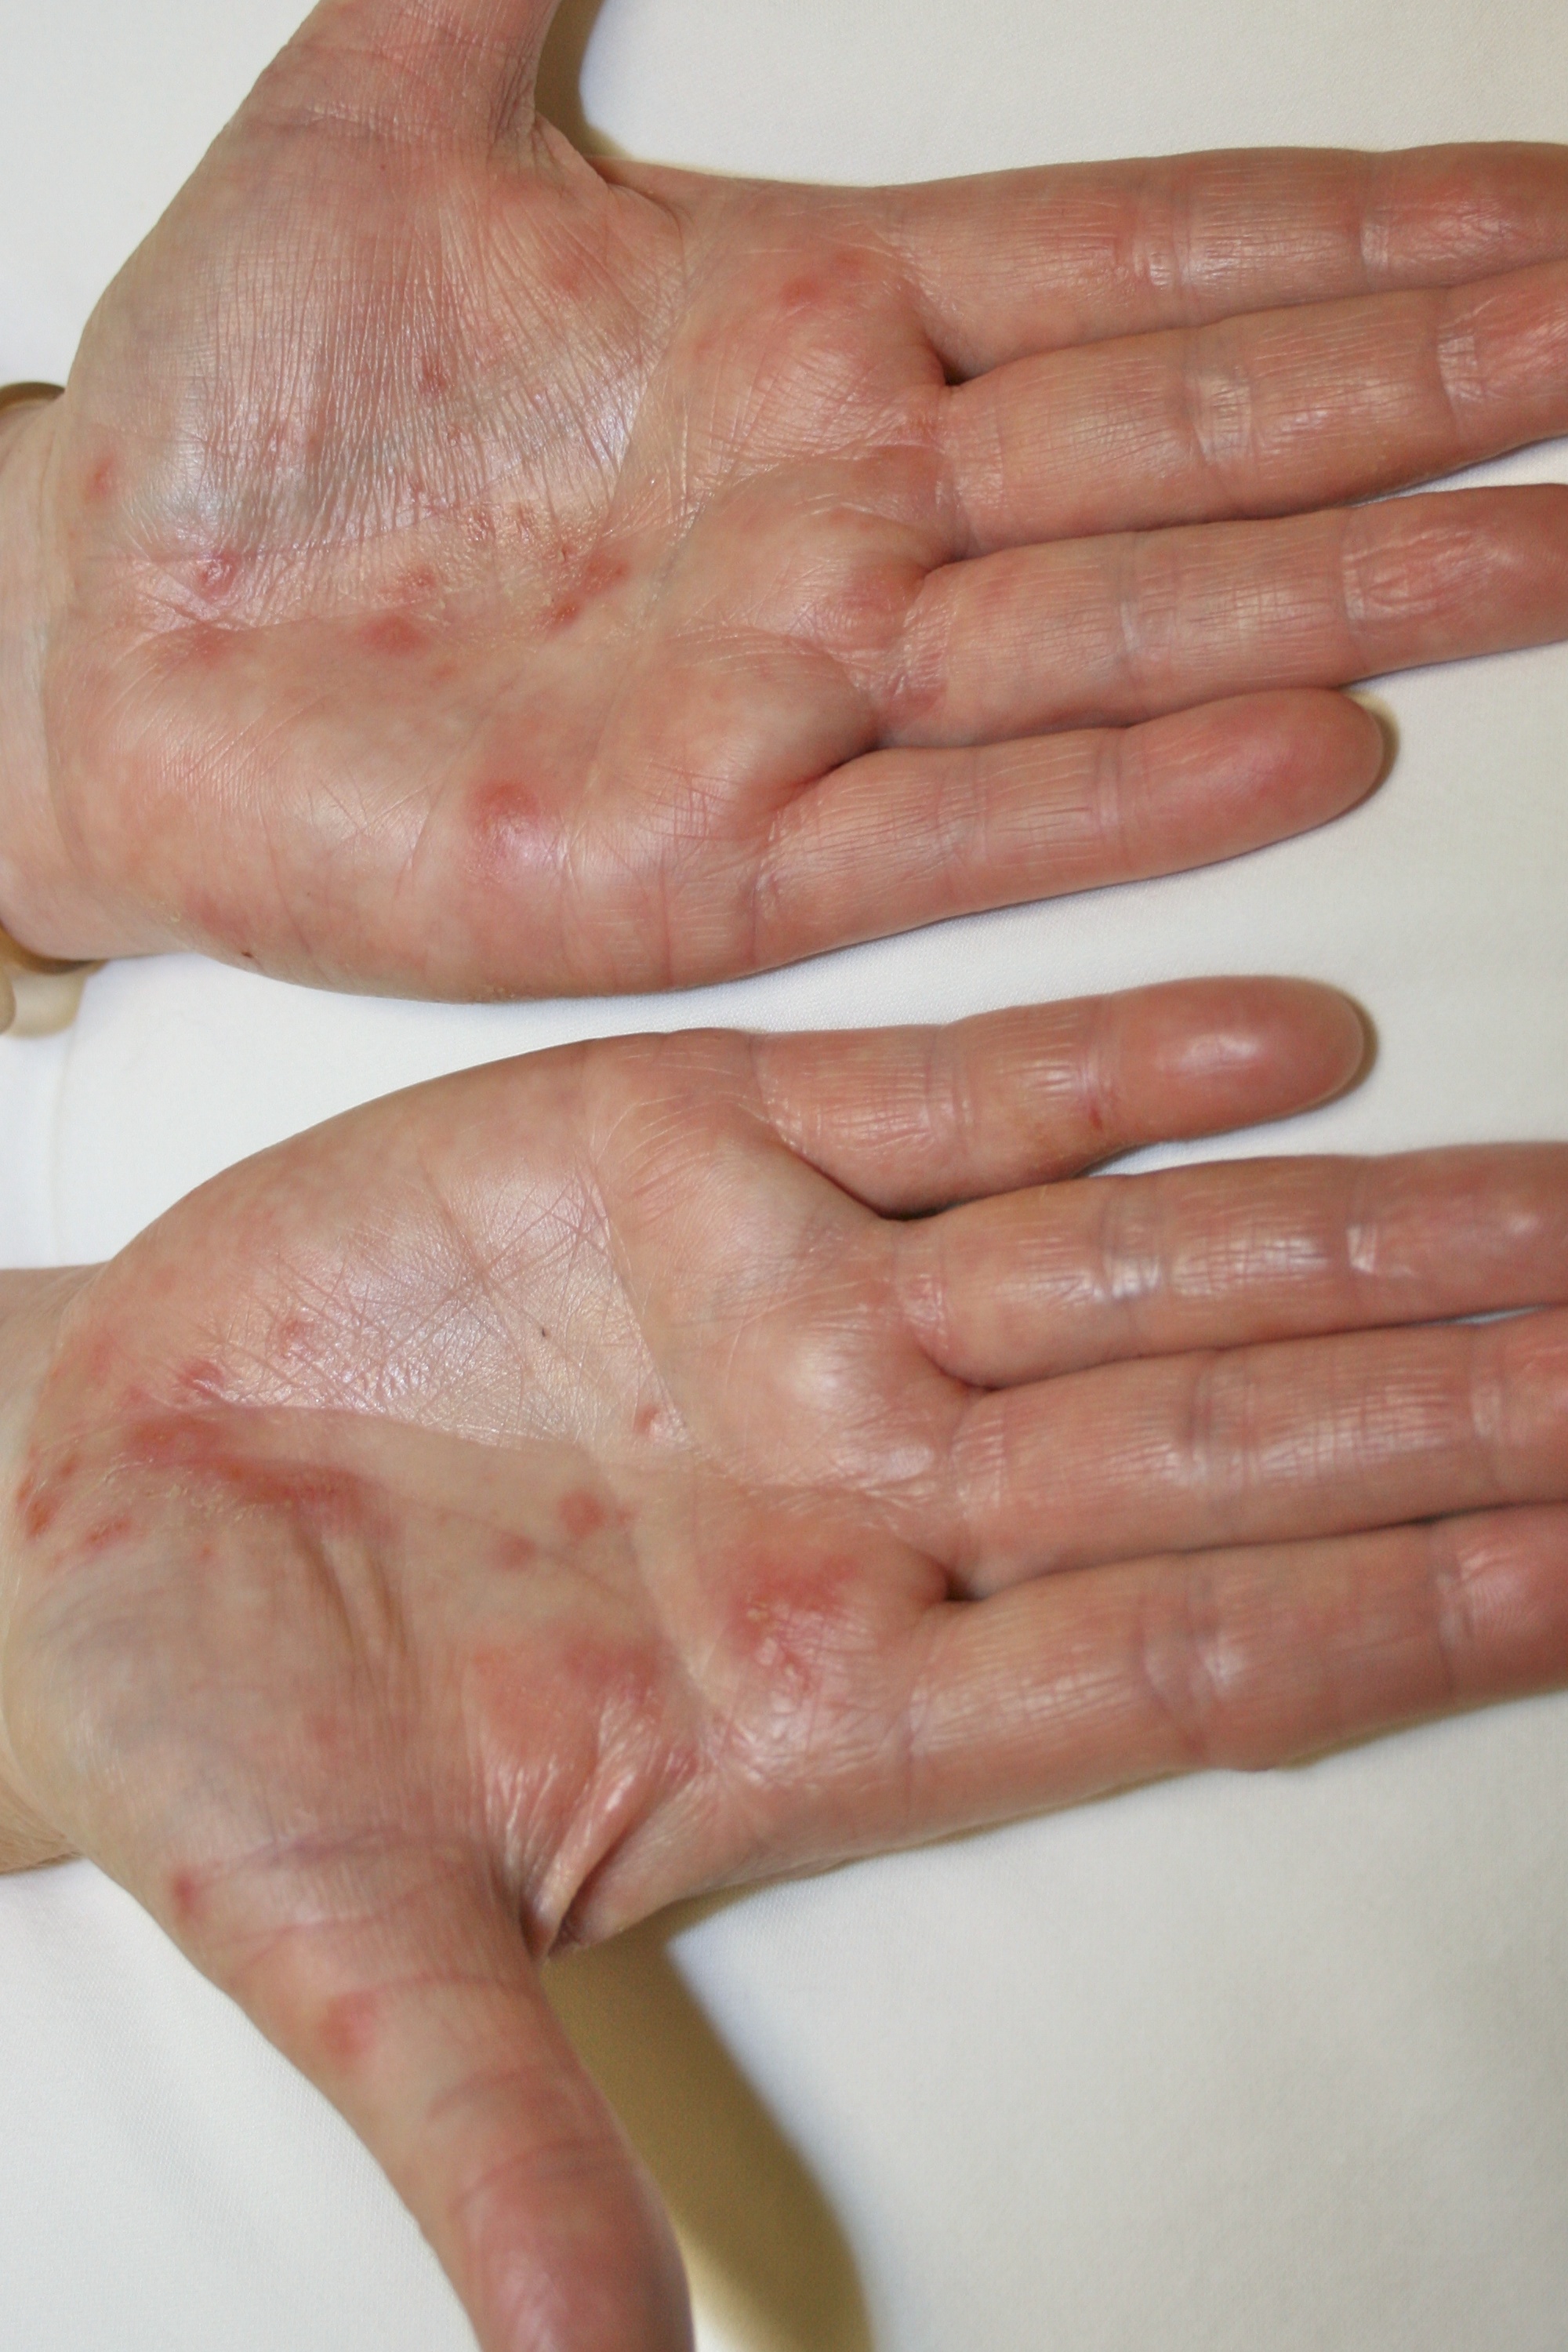 shingles on palms of hands #11